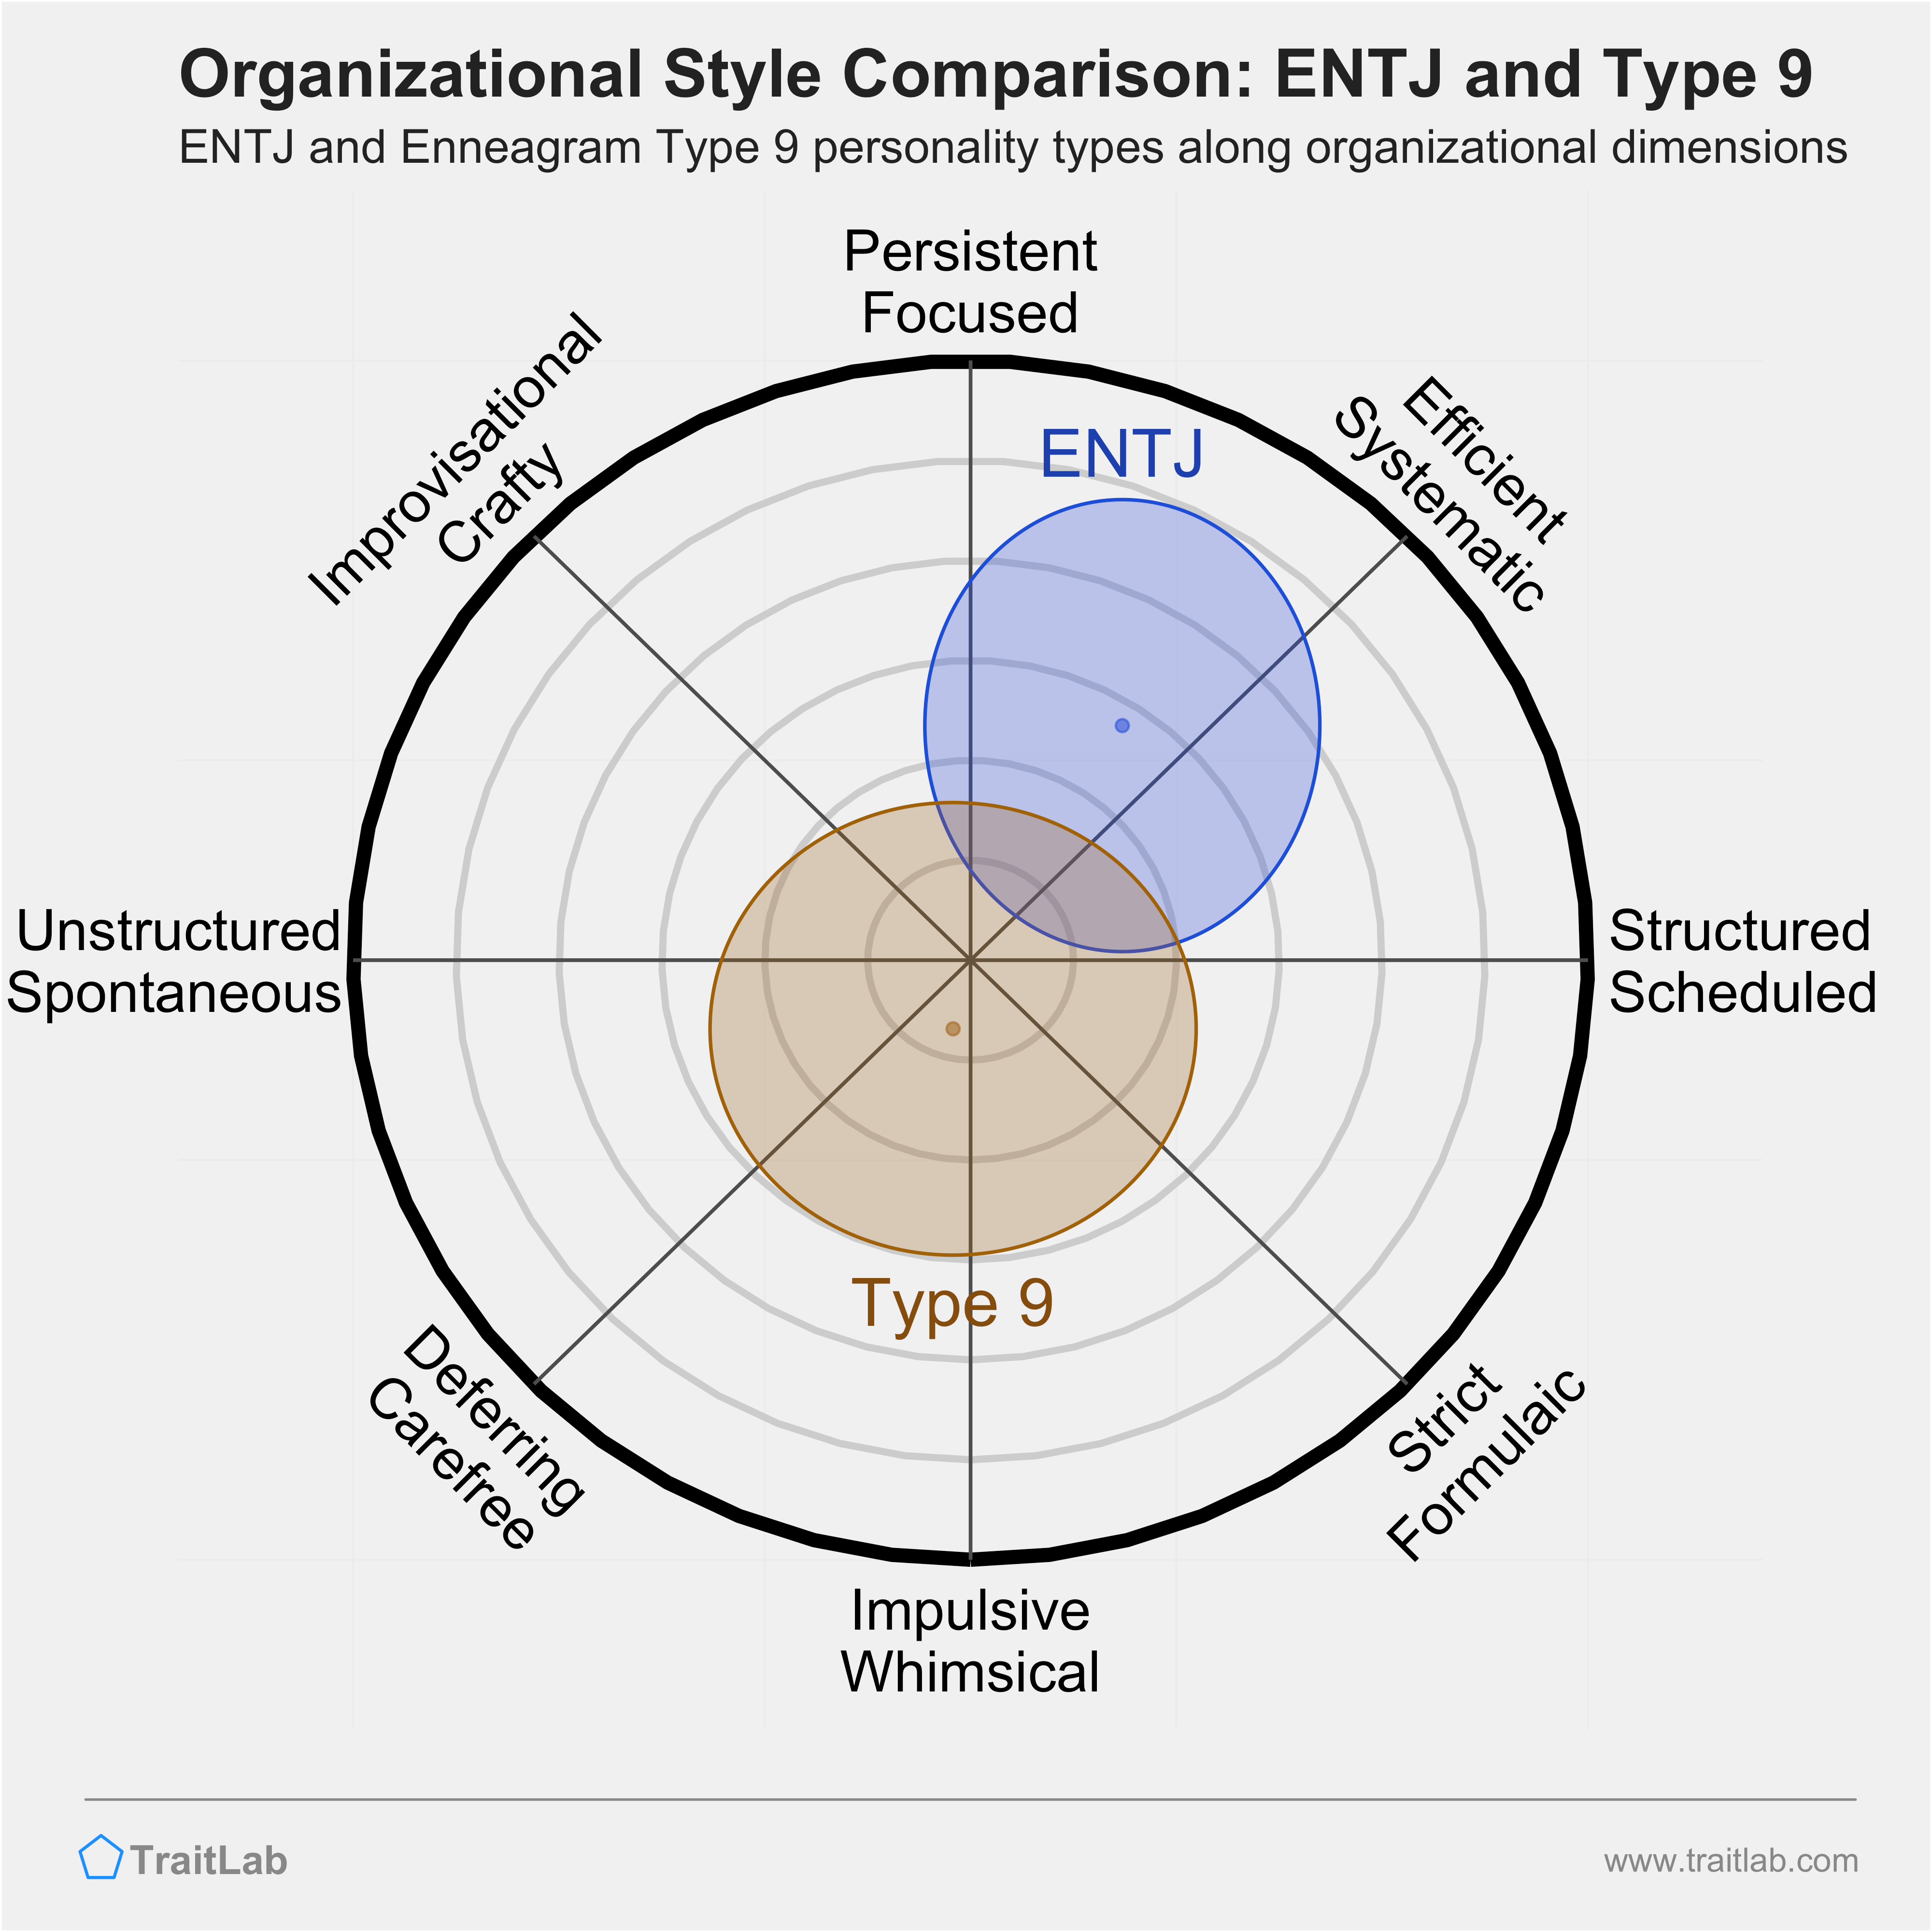 ENTJ and Type 9 comparison across organizational dimensions